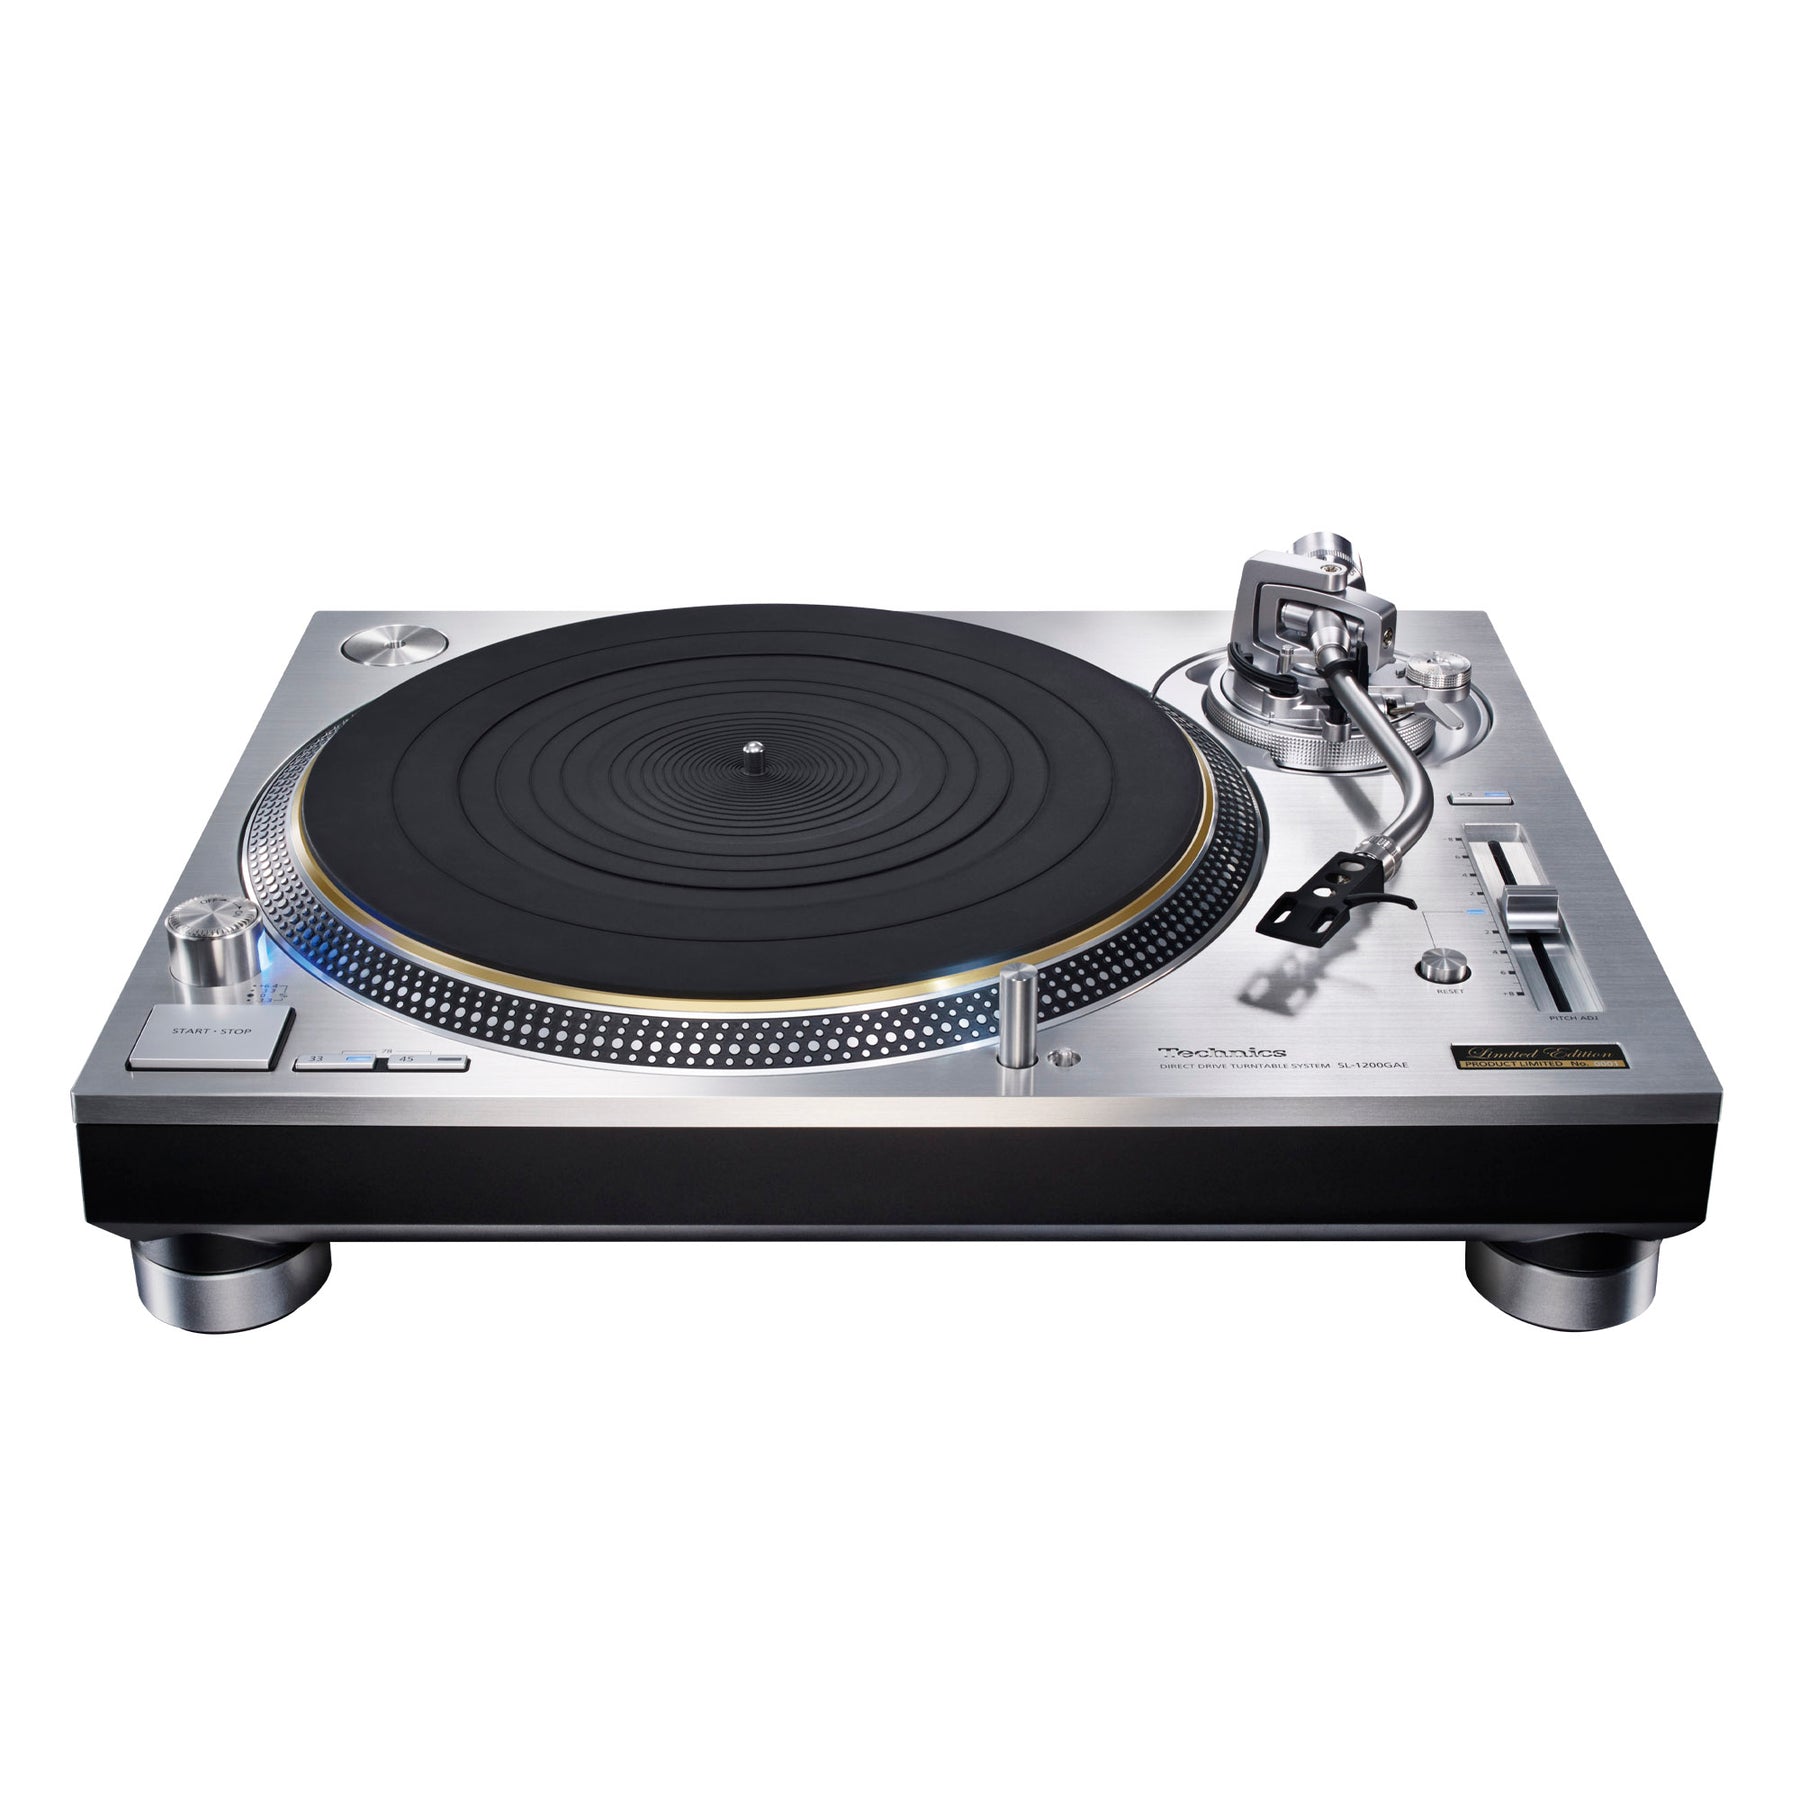 50th Anniversary Limited Edition Direct Drive Turntable System SL-1200GAE